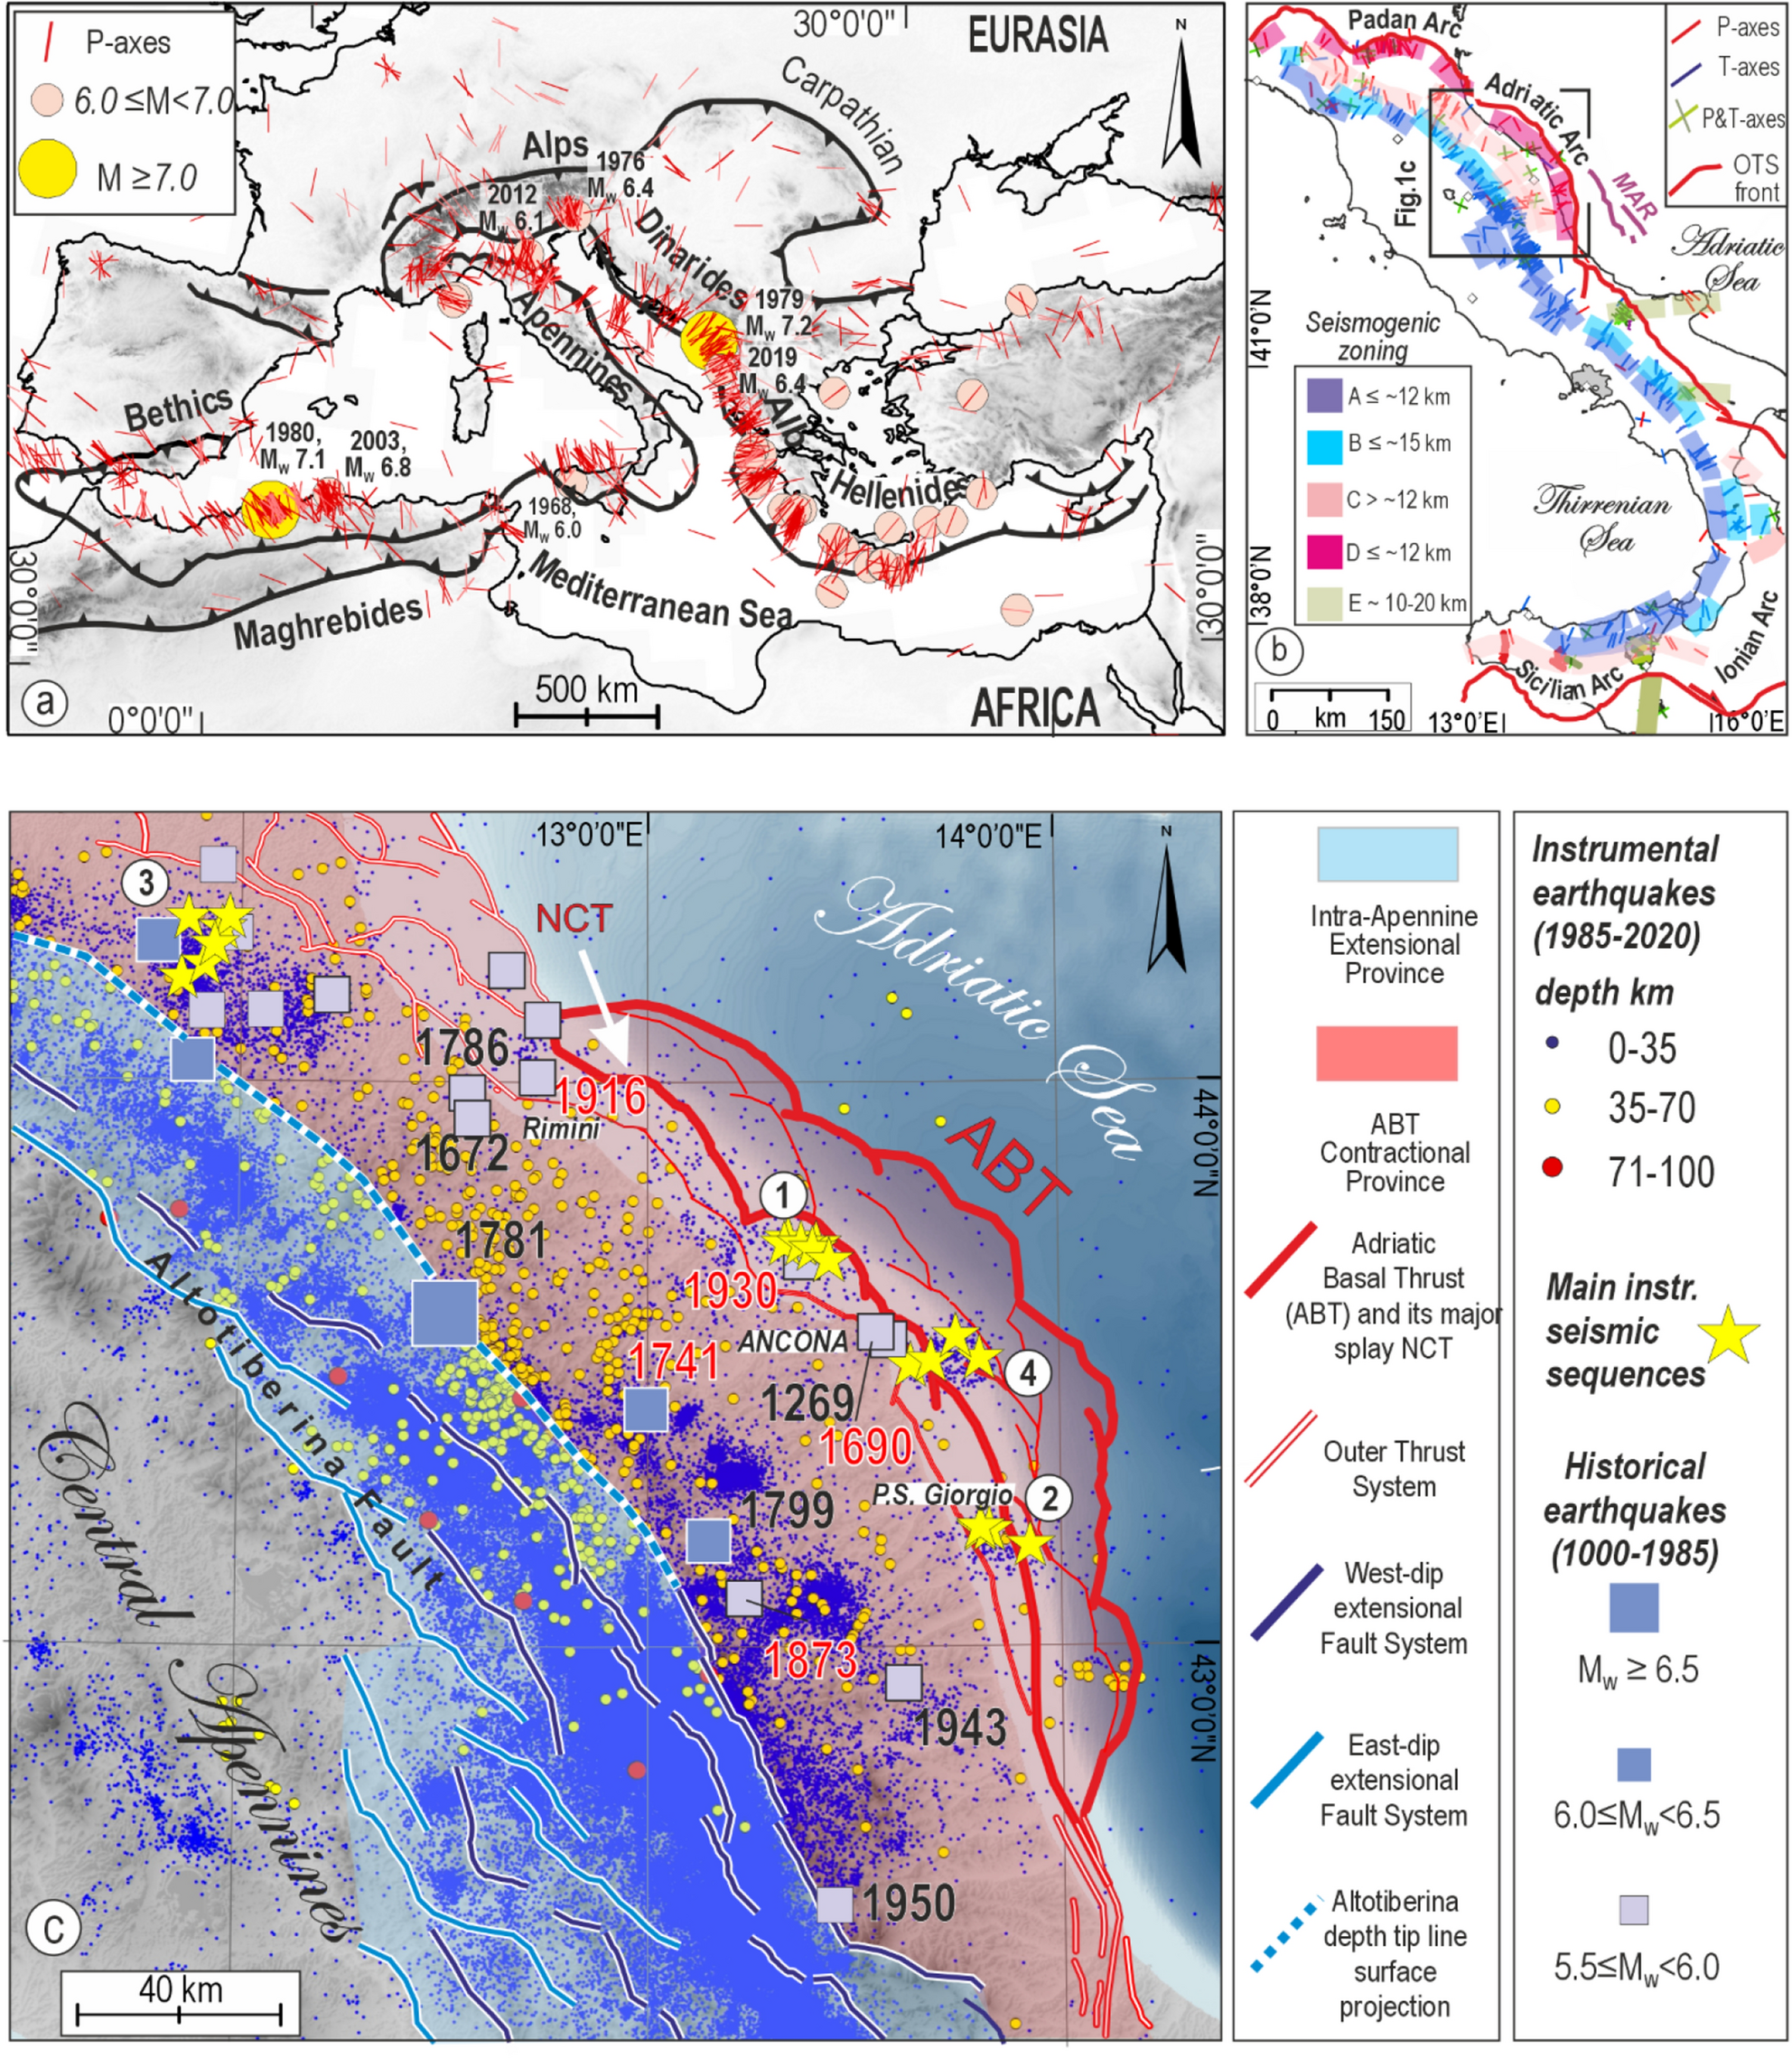 Lithospheric double shear zone unveiled by microseismicity in a region of  slow deformation | Scientific Reports